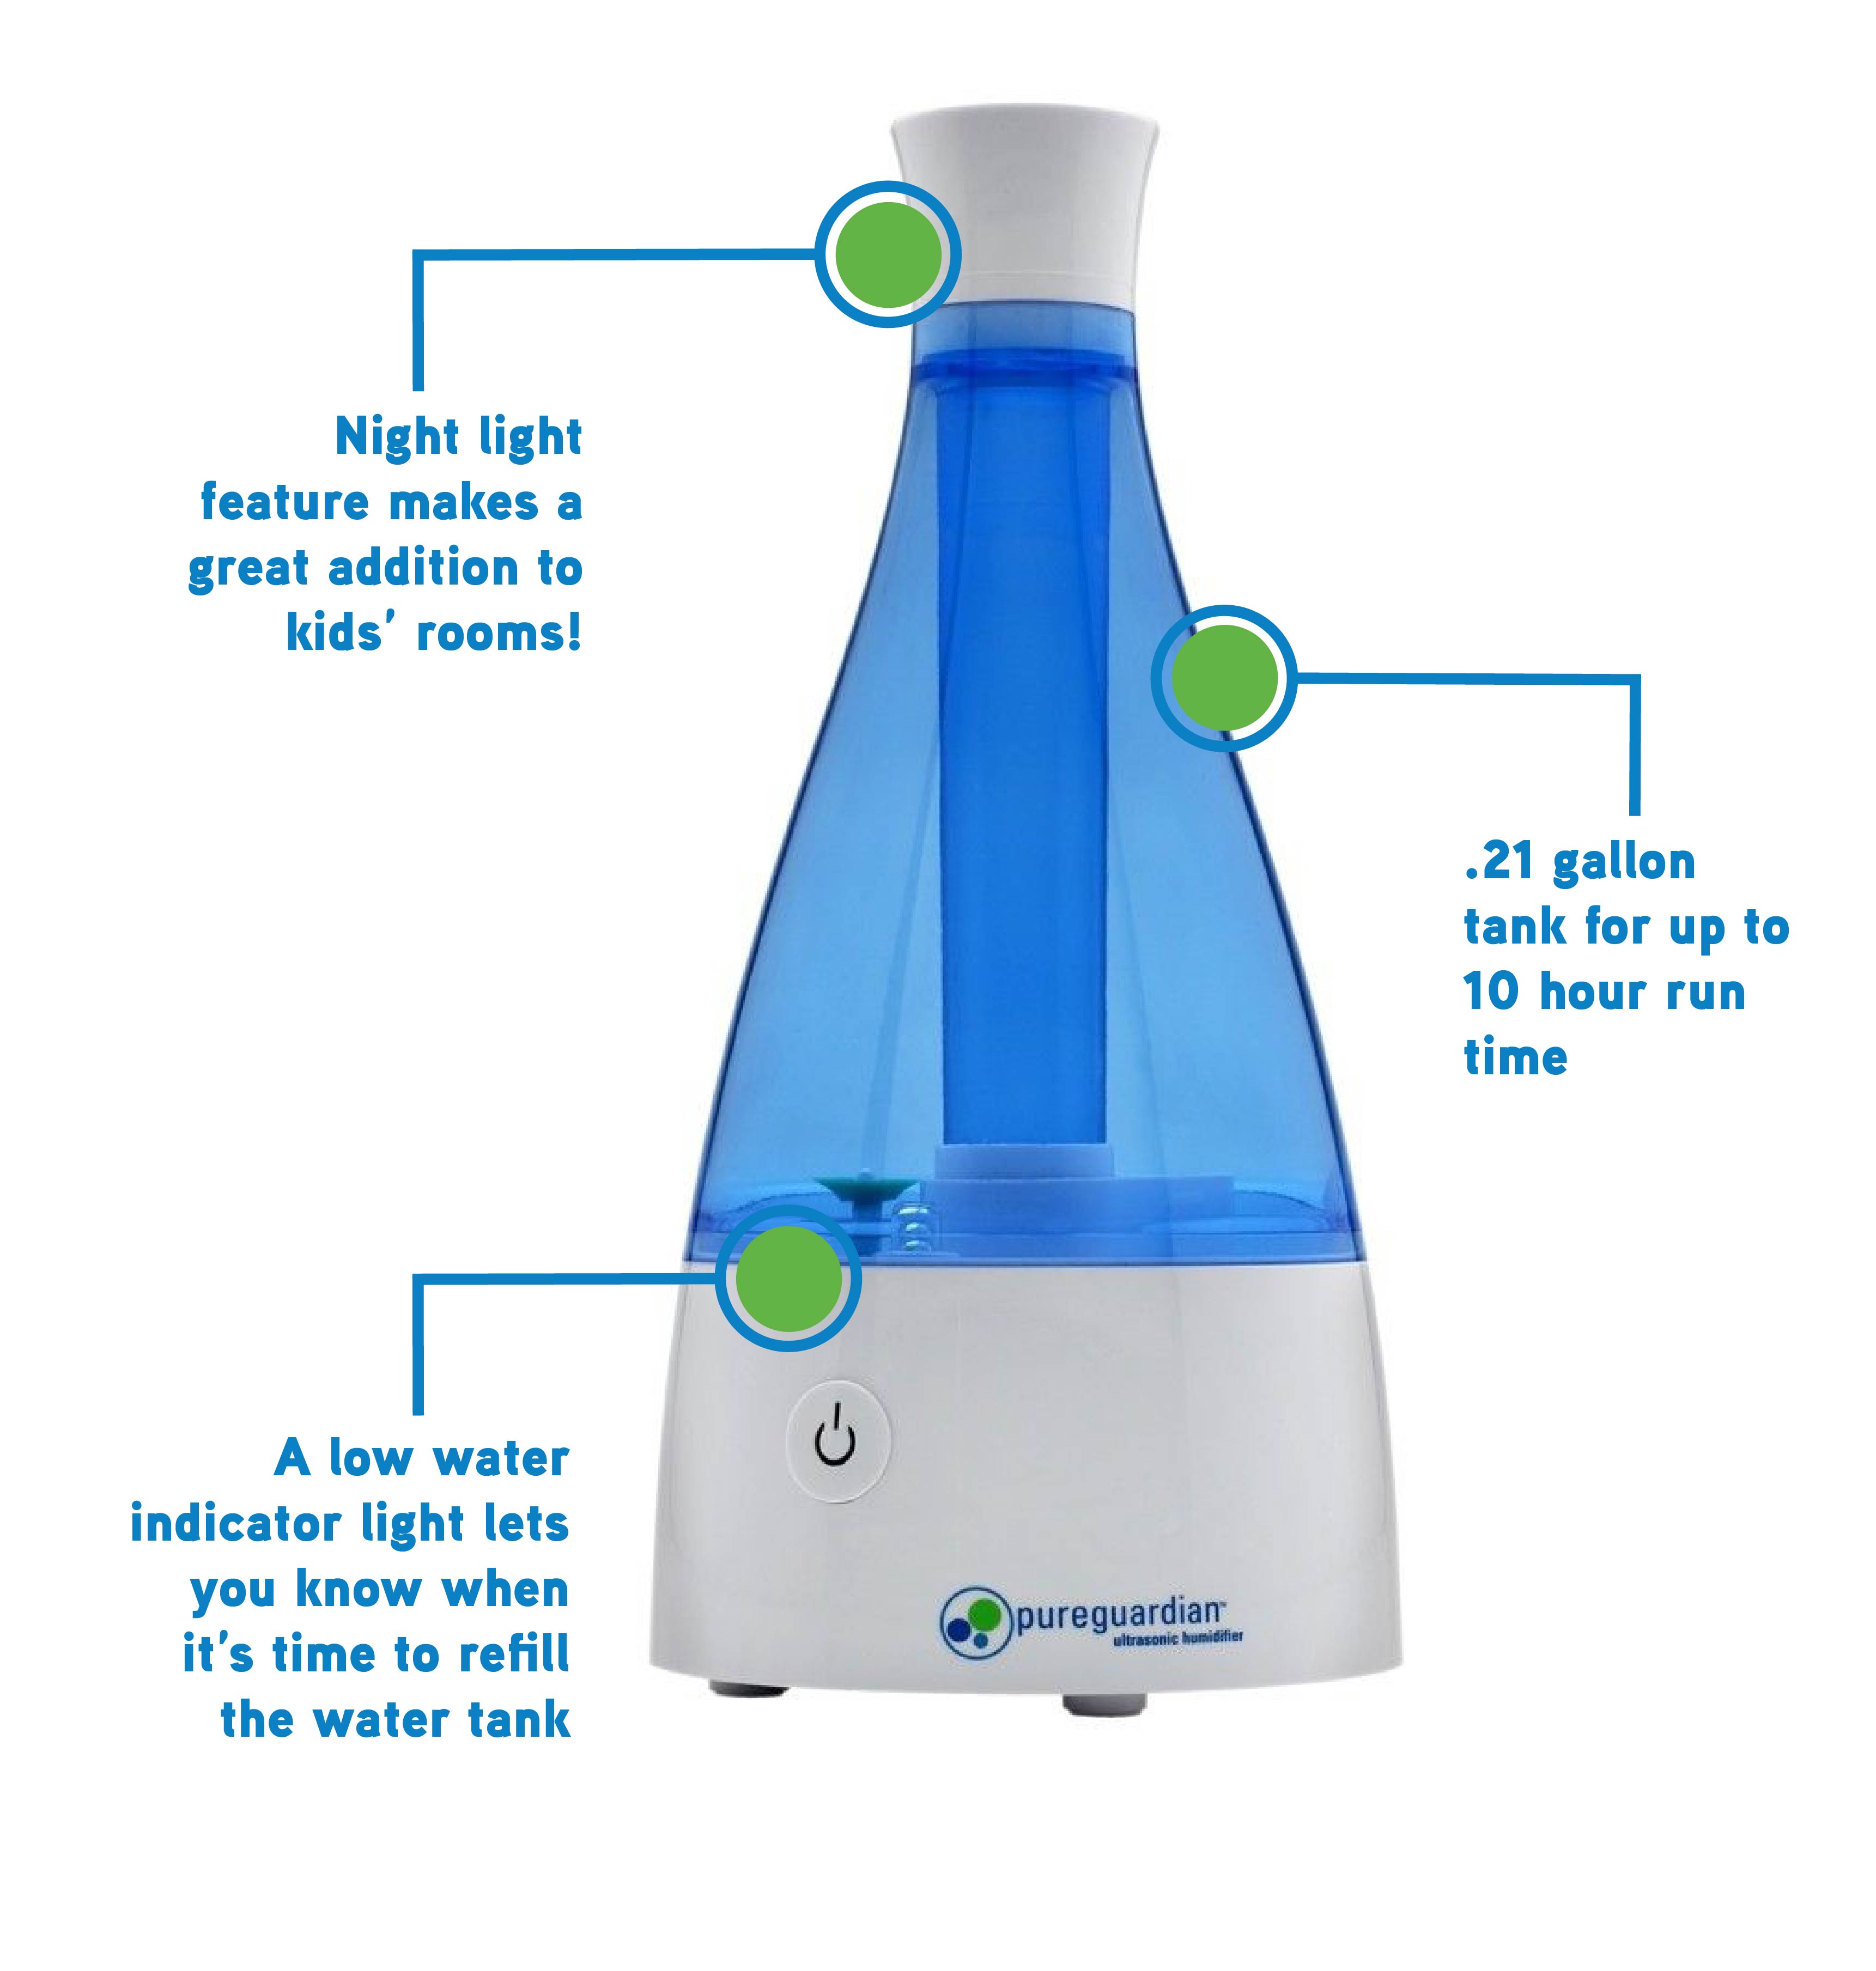 PureGuardian 210 sq. ft. 0.21 Gallon Cool Mist Ultrasonic Humidifier with Night Light, H920BL - image 4 of 10